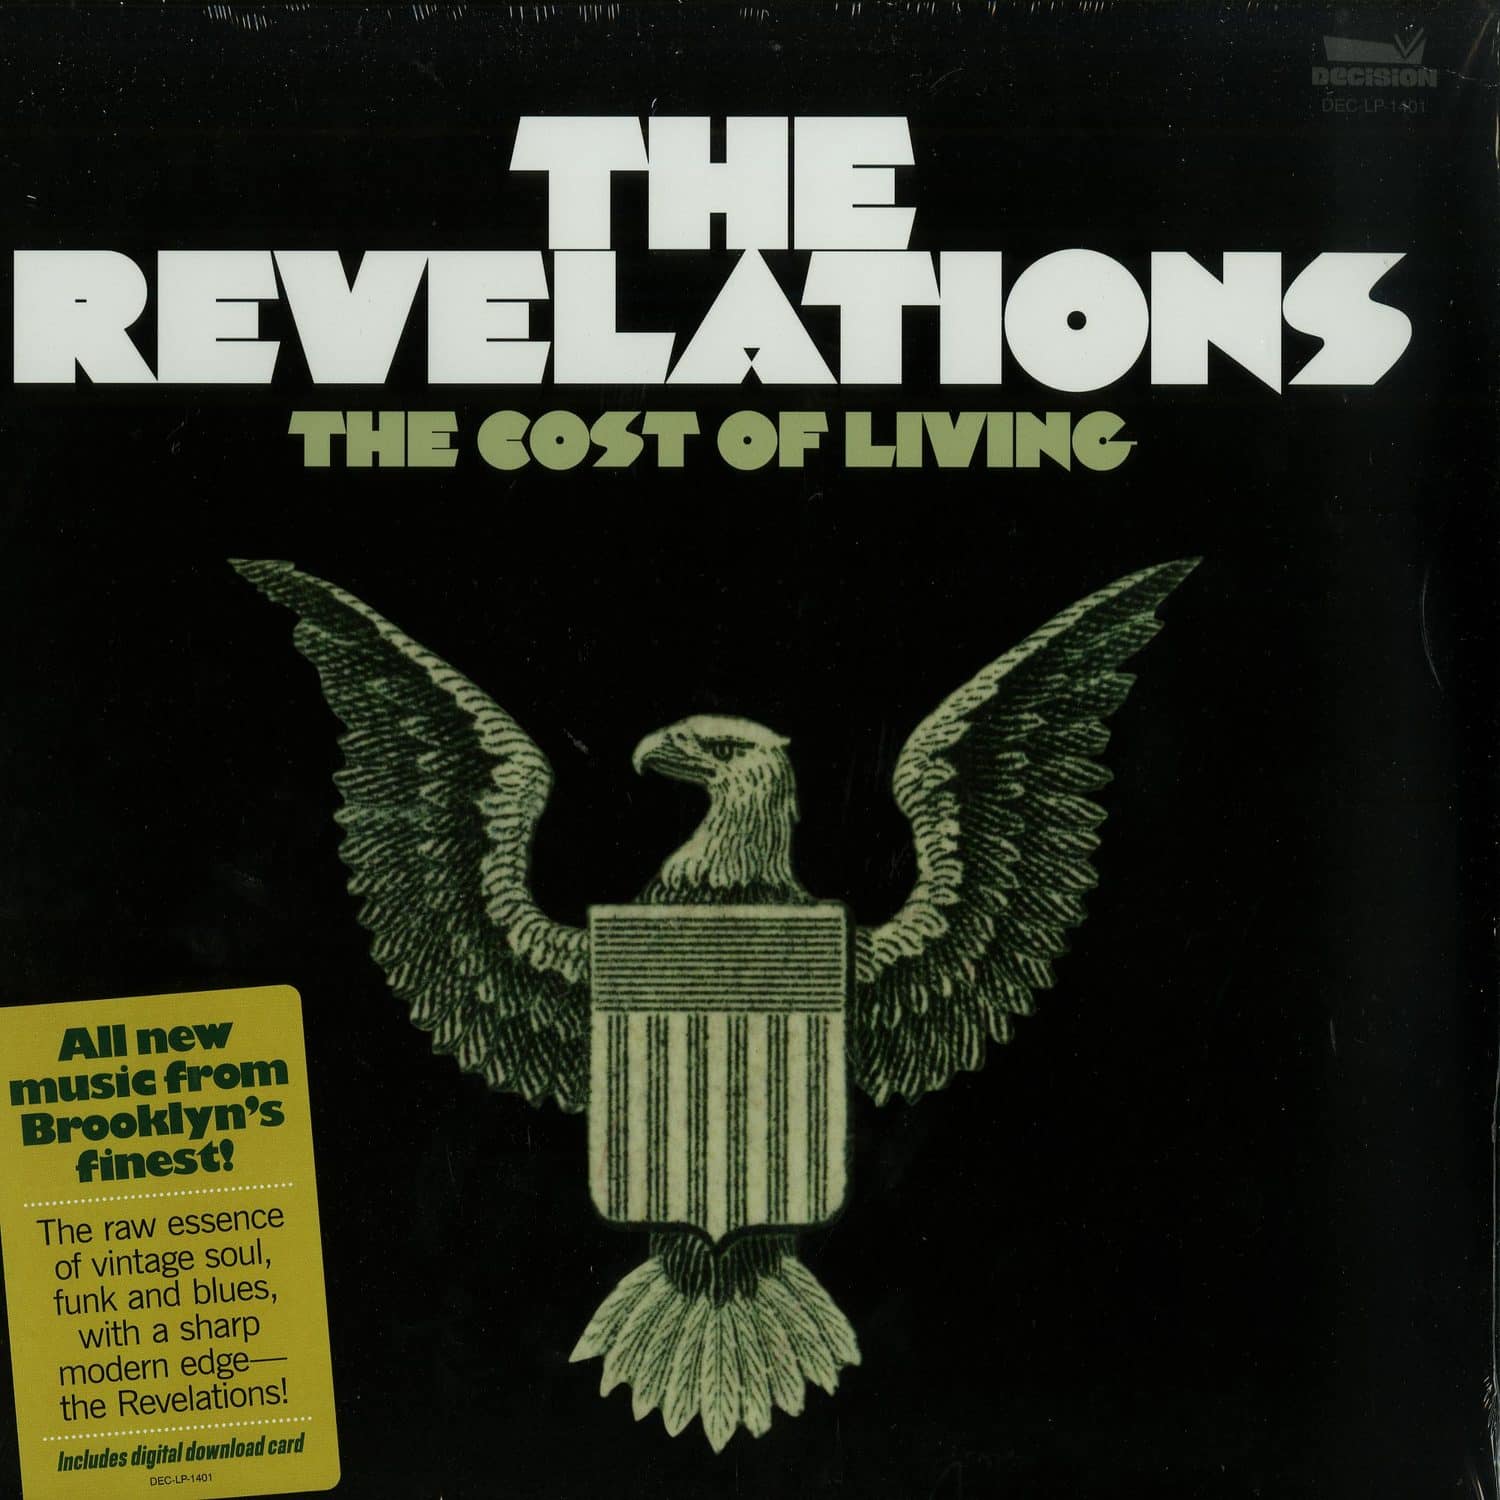 The Revelations - THE COST OF LIVING 